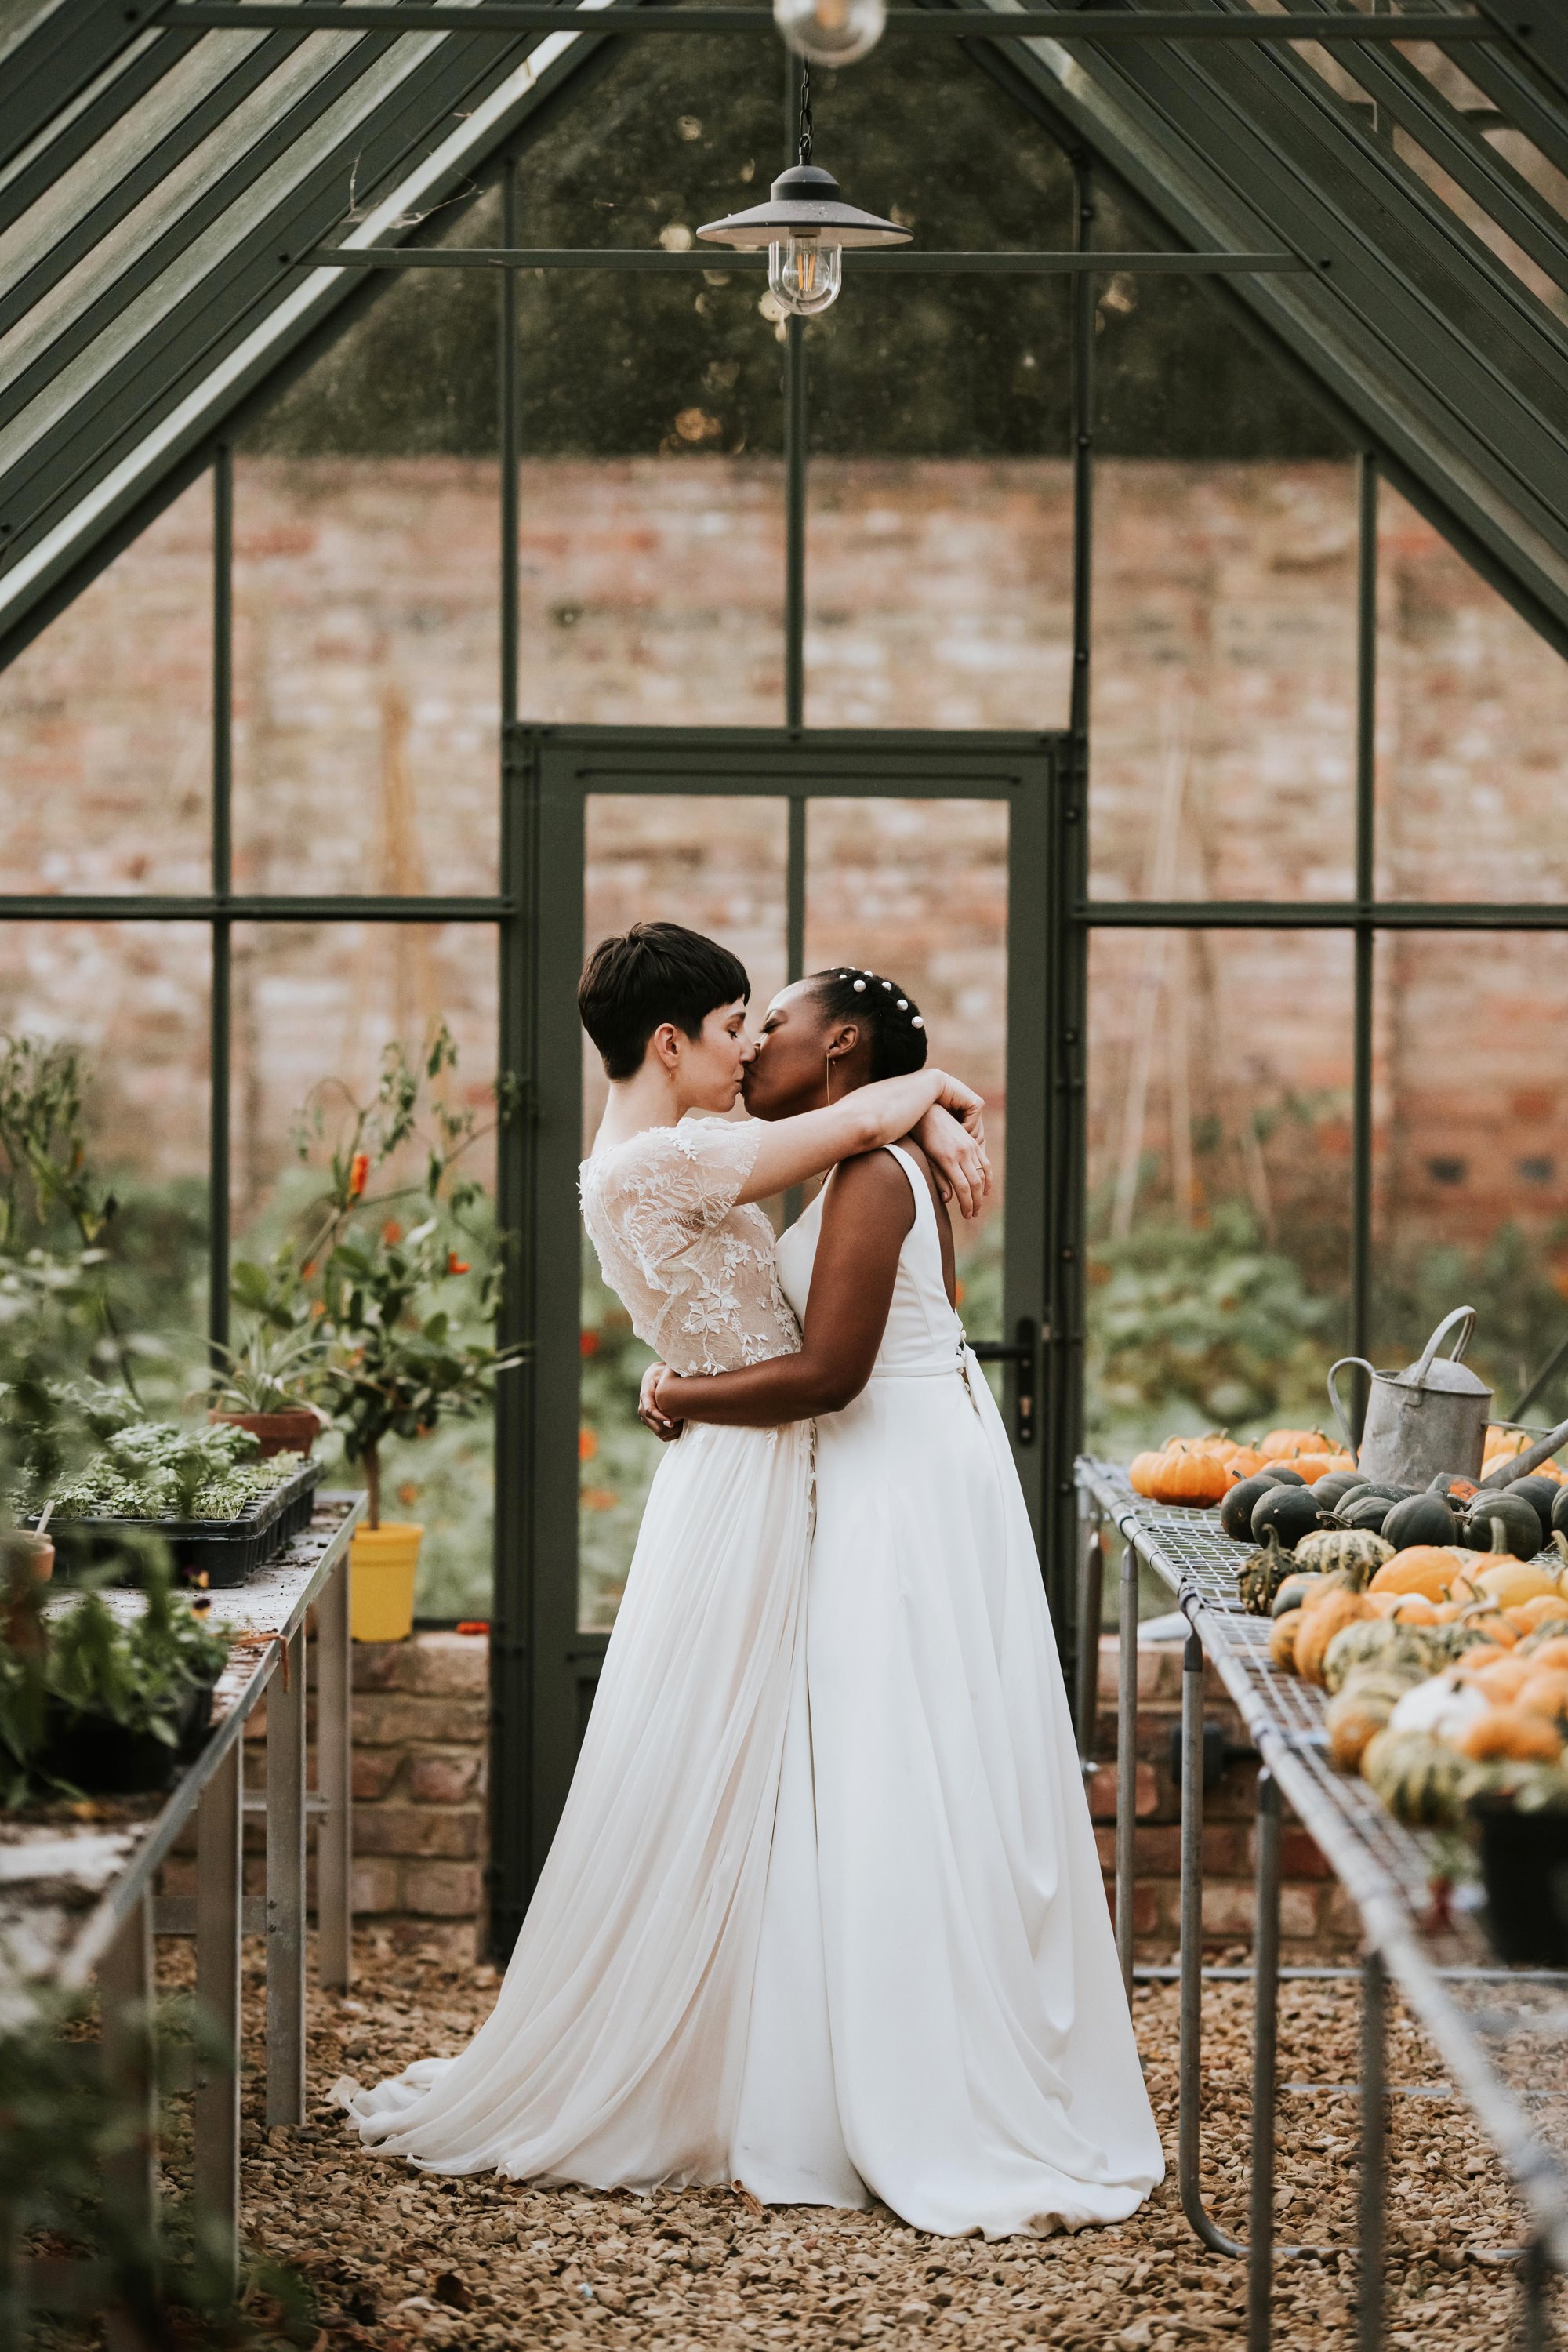 two beautiful brides embracing in a greenhouse of a walled garden, with pumpkins and plants all around them